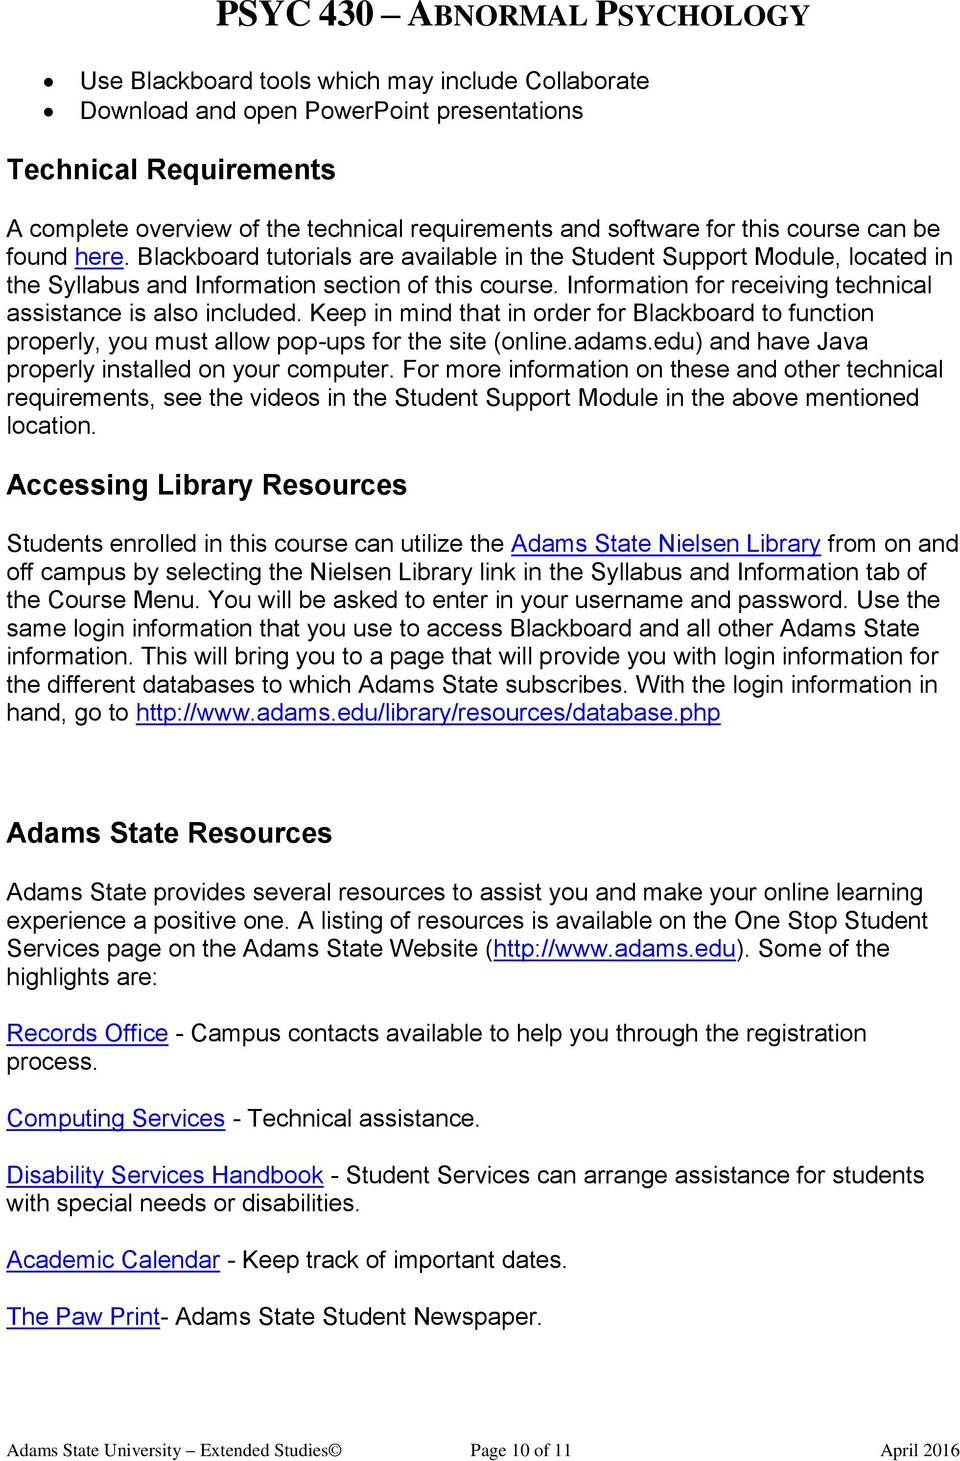 Information for receiving technical assistance is also included. Keep in mind that in order for Blackboard to function properly, you must allow pop-ups for the site (online.adams.